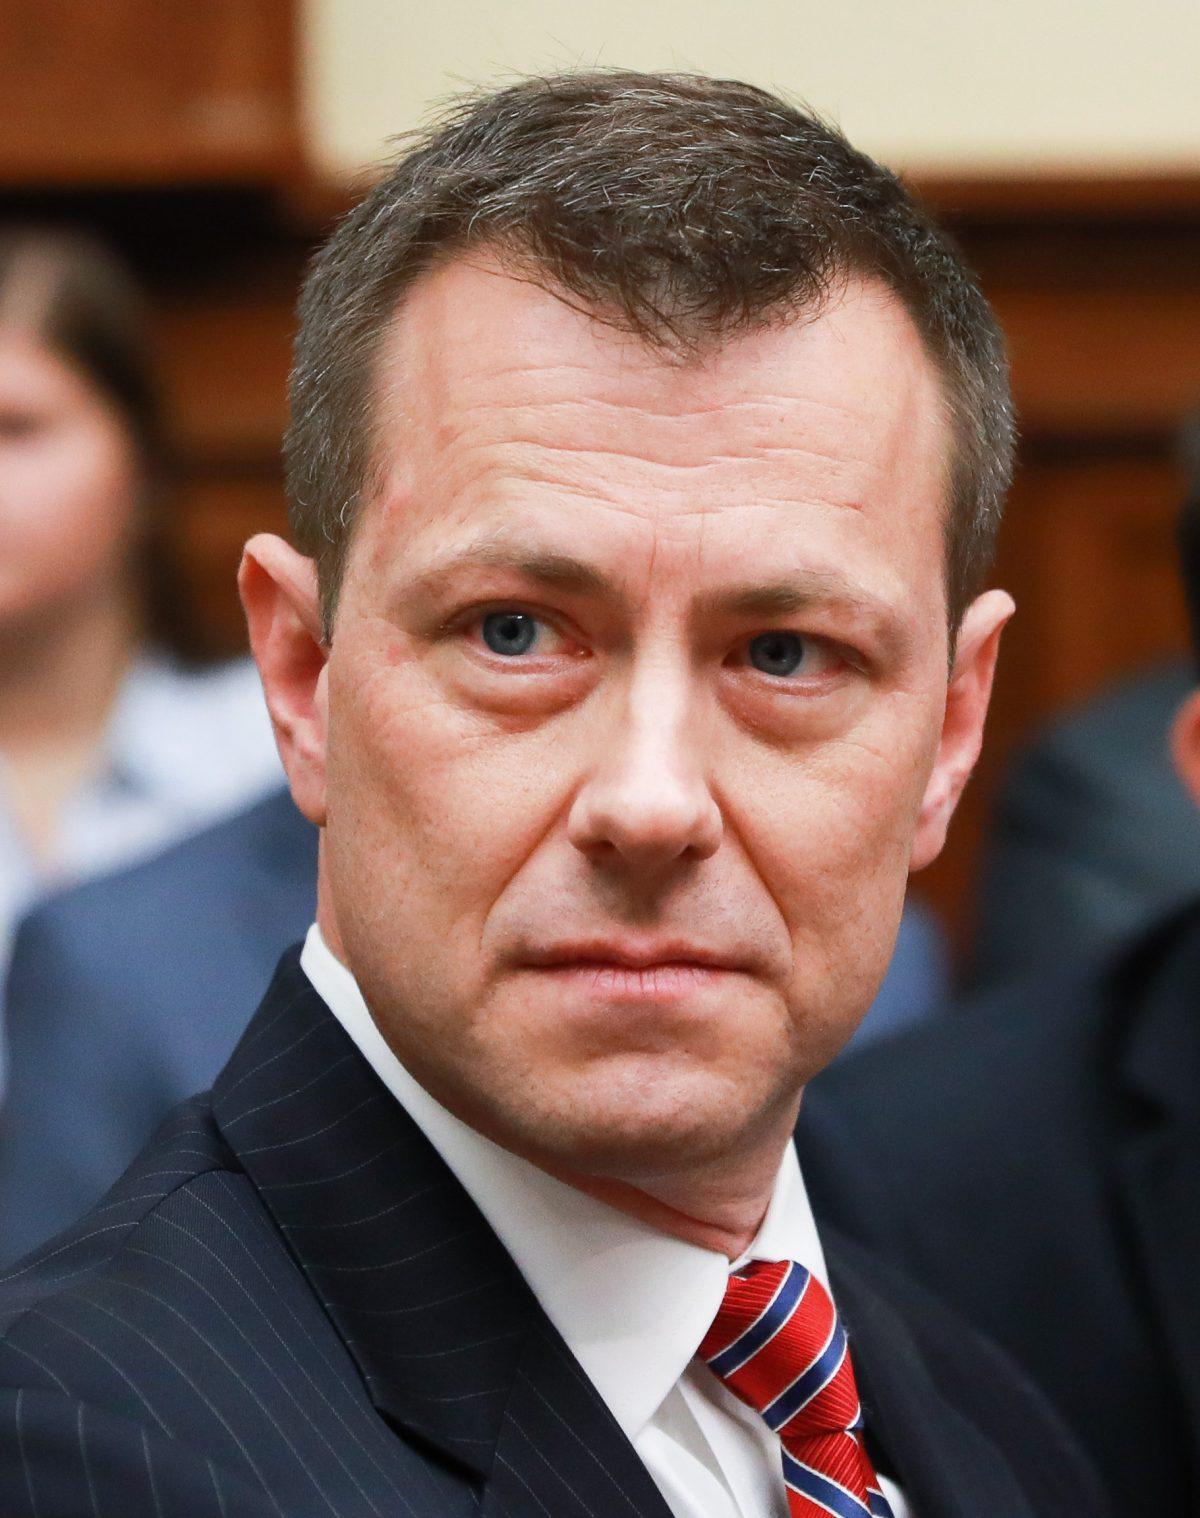 Former FBI agent Peter Strzok, who frequently messaged with his mistress about the investigation into alleged collusion between President Donald Trump's campaign and Russian actors. (Samira Bouaou/The Epoch Times)